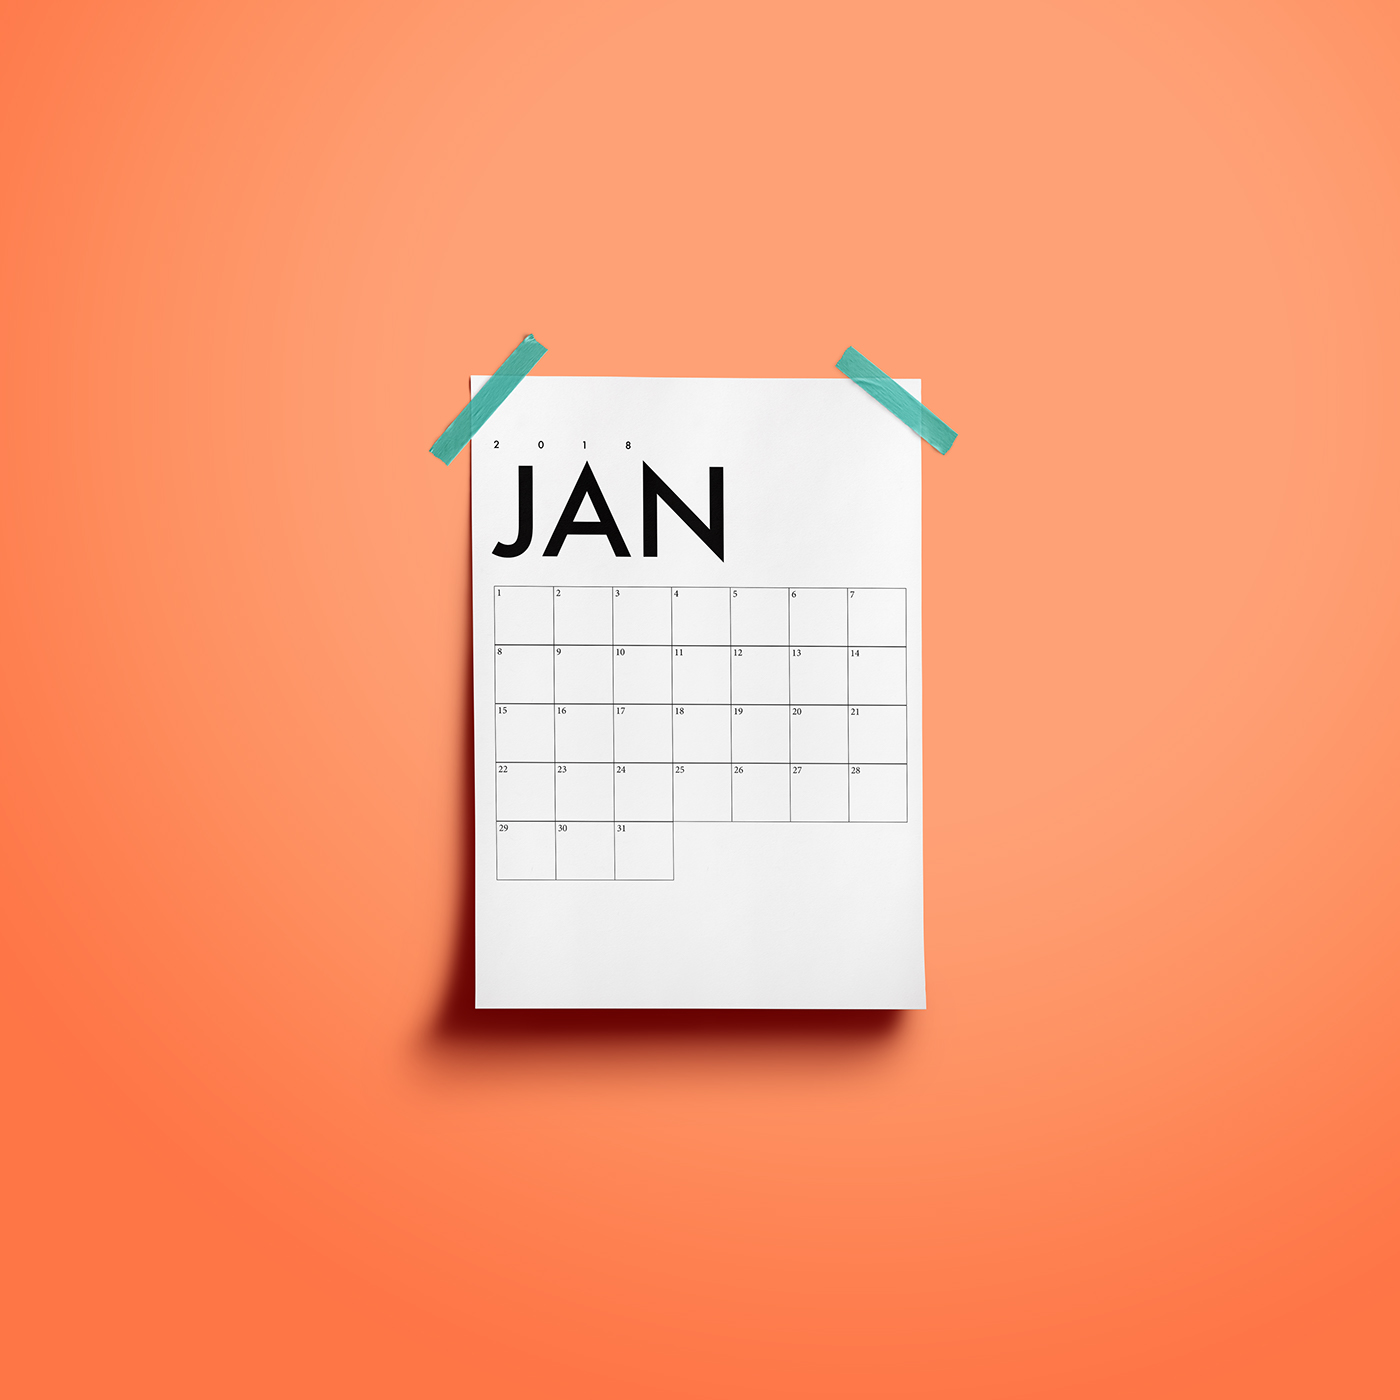 Download 30 Free PSD Calendar Templates & Mockups to create the best design! | Free PSD Templates